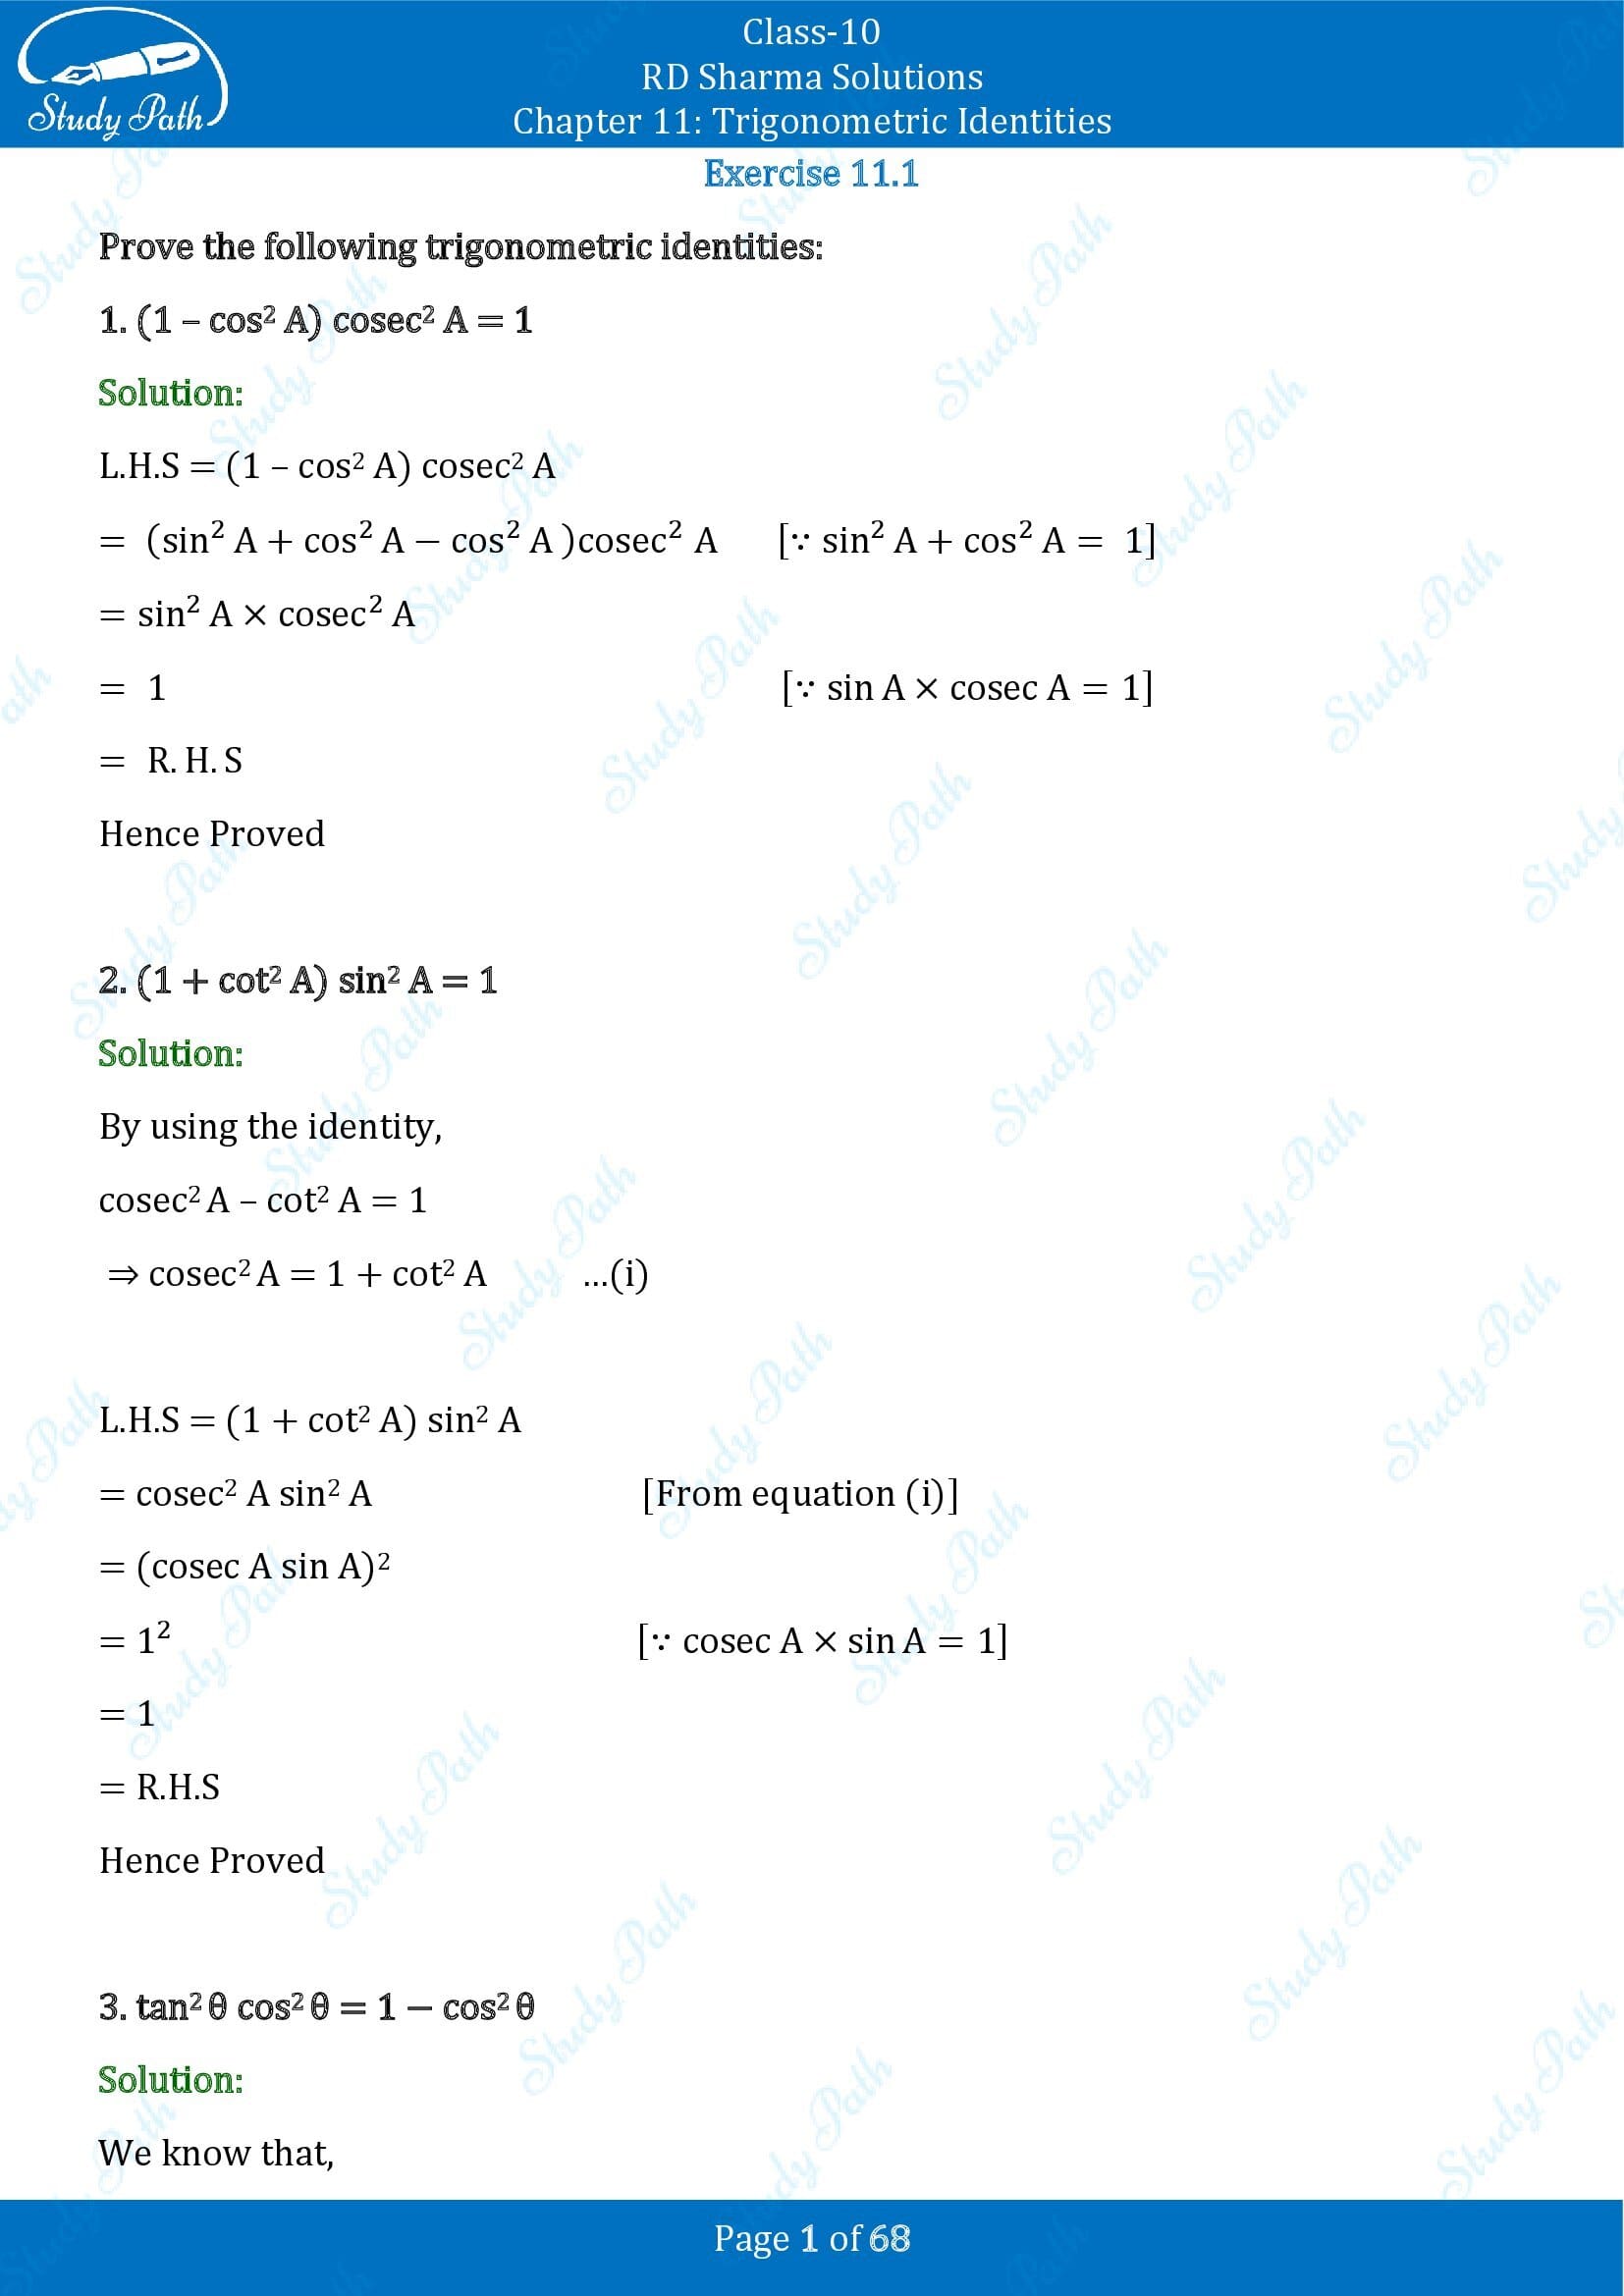 RD Sharma Solutions Class 10 Chapter 11 Trigonometric Identities Exercise 11.1 00001